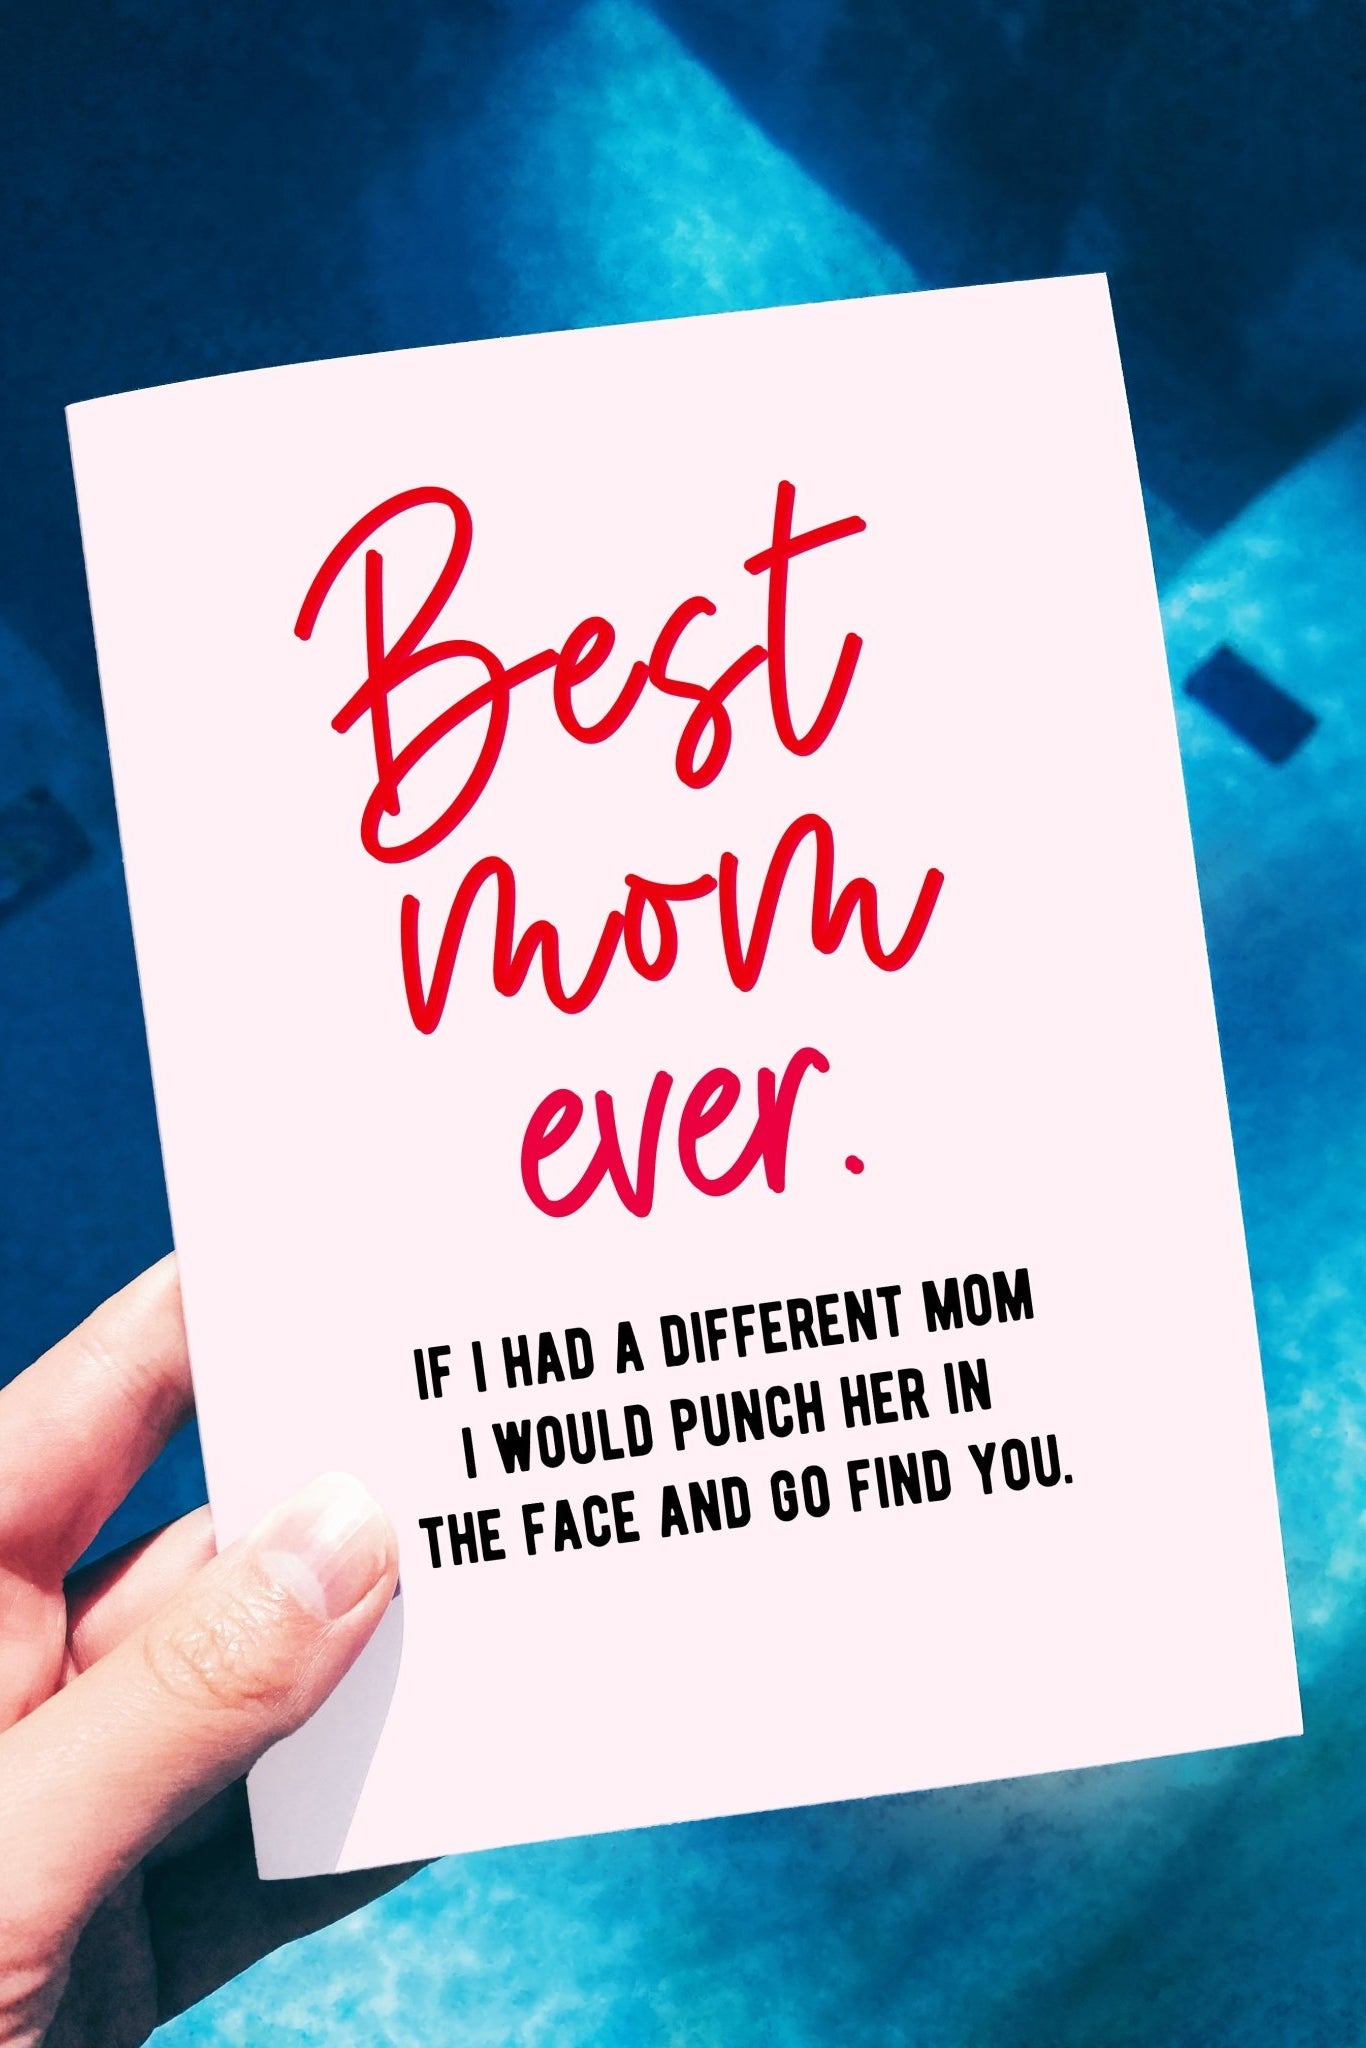 https://cdn.shopify.com/s/files/1/2169/8635/products/best-mom-ever-funny-mothers-day-greeting-card-789664.jpg?crop=region&crop_height=2048&crop_left=85&crop_top=0&crop_width=1366&v=1665546459&width=1536